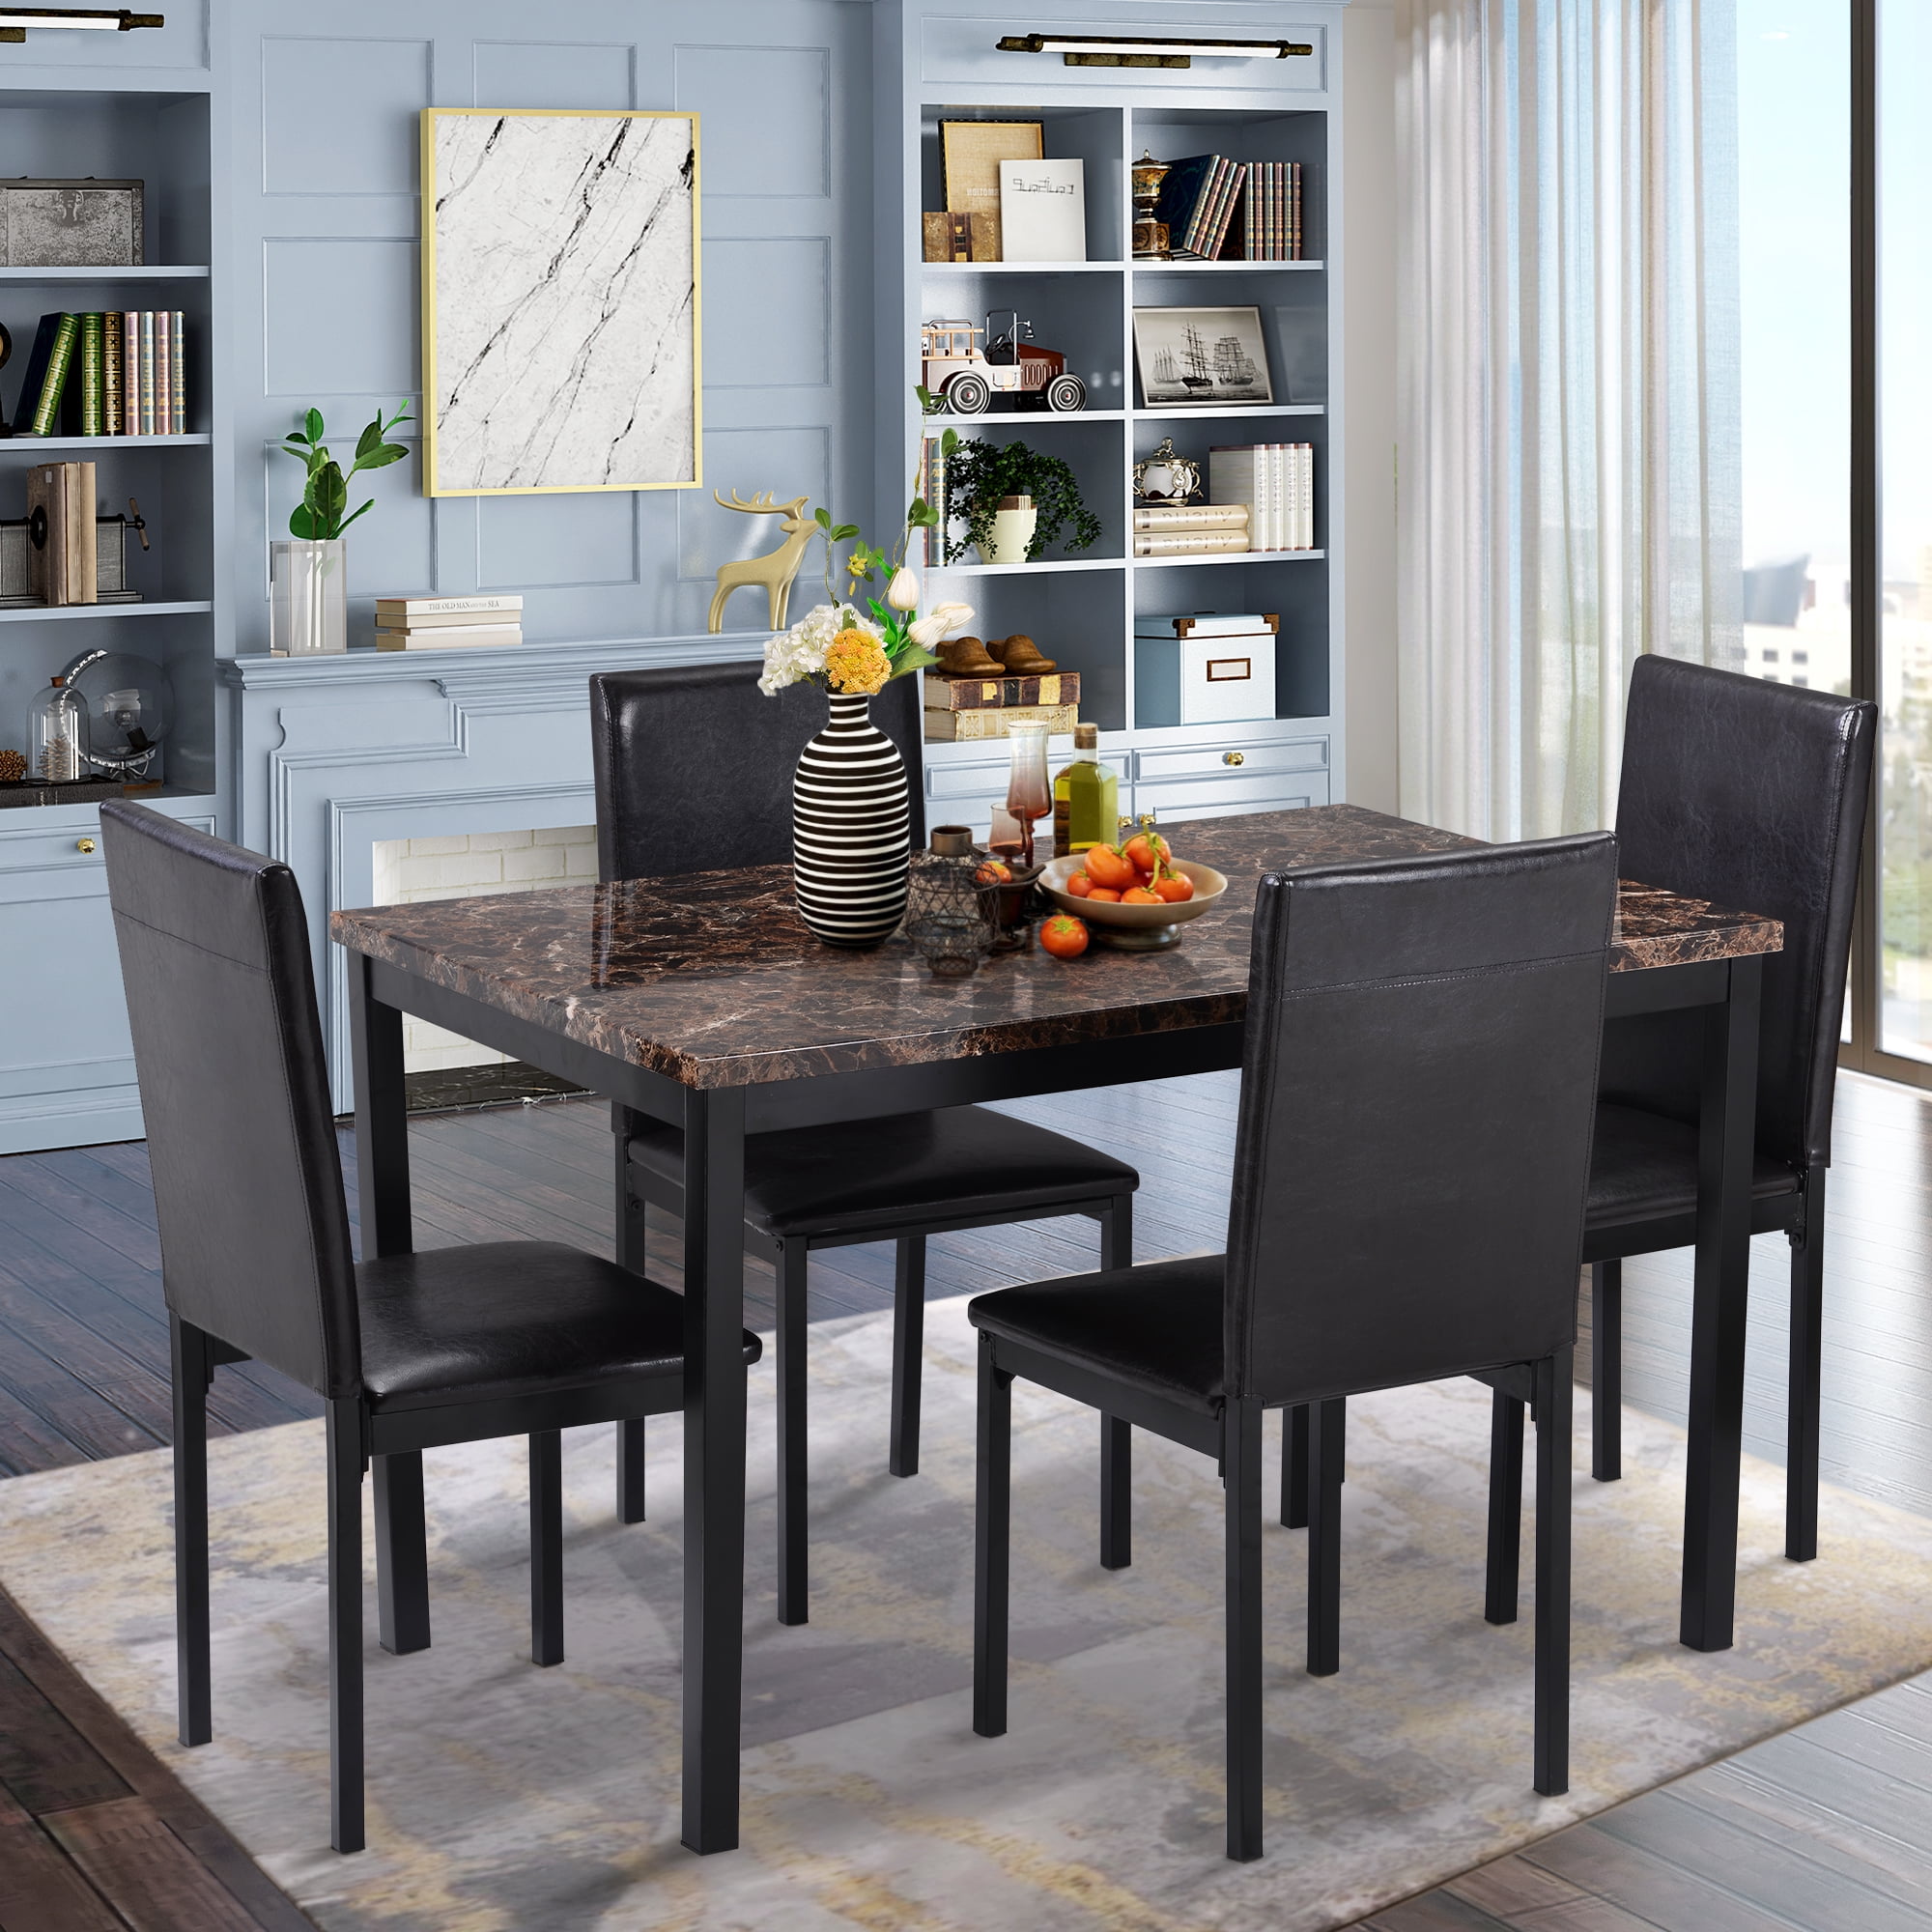 Kitchen Table And 4 Chairs Set 42 X30, Black Dinette Table And Chairs